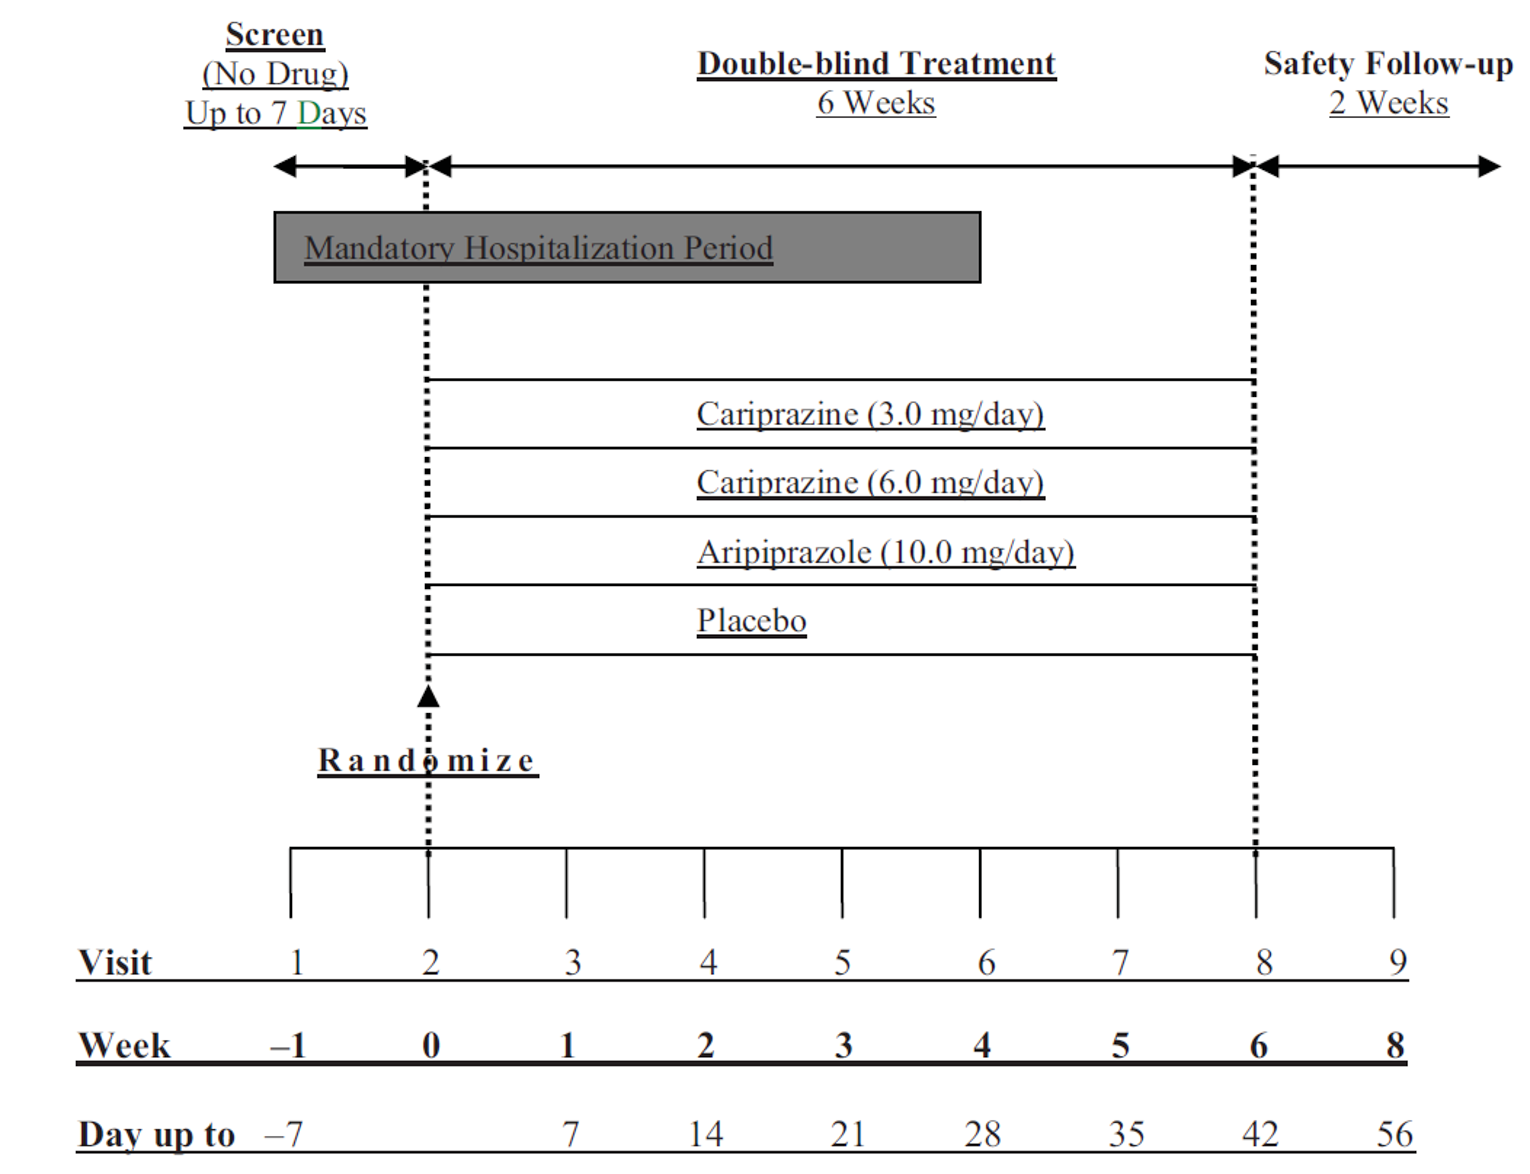 The timeline for Study RGH-MD-04, which included an up to 7-day screening phase, a 6-week randomized double-blind treatment phase, and a 2-week safety follow-up phase.